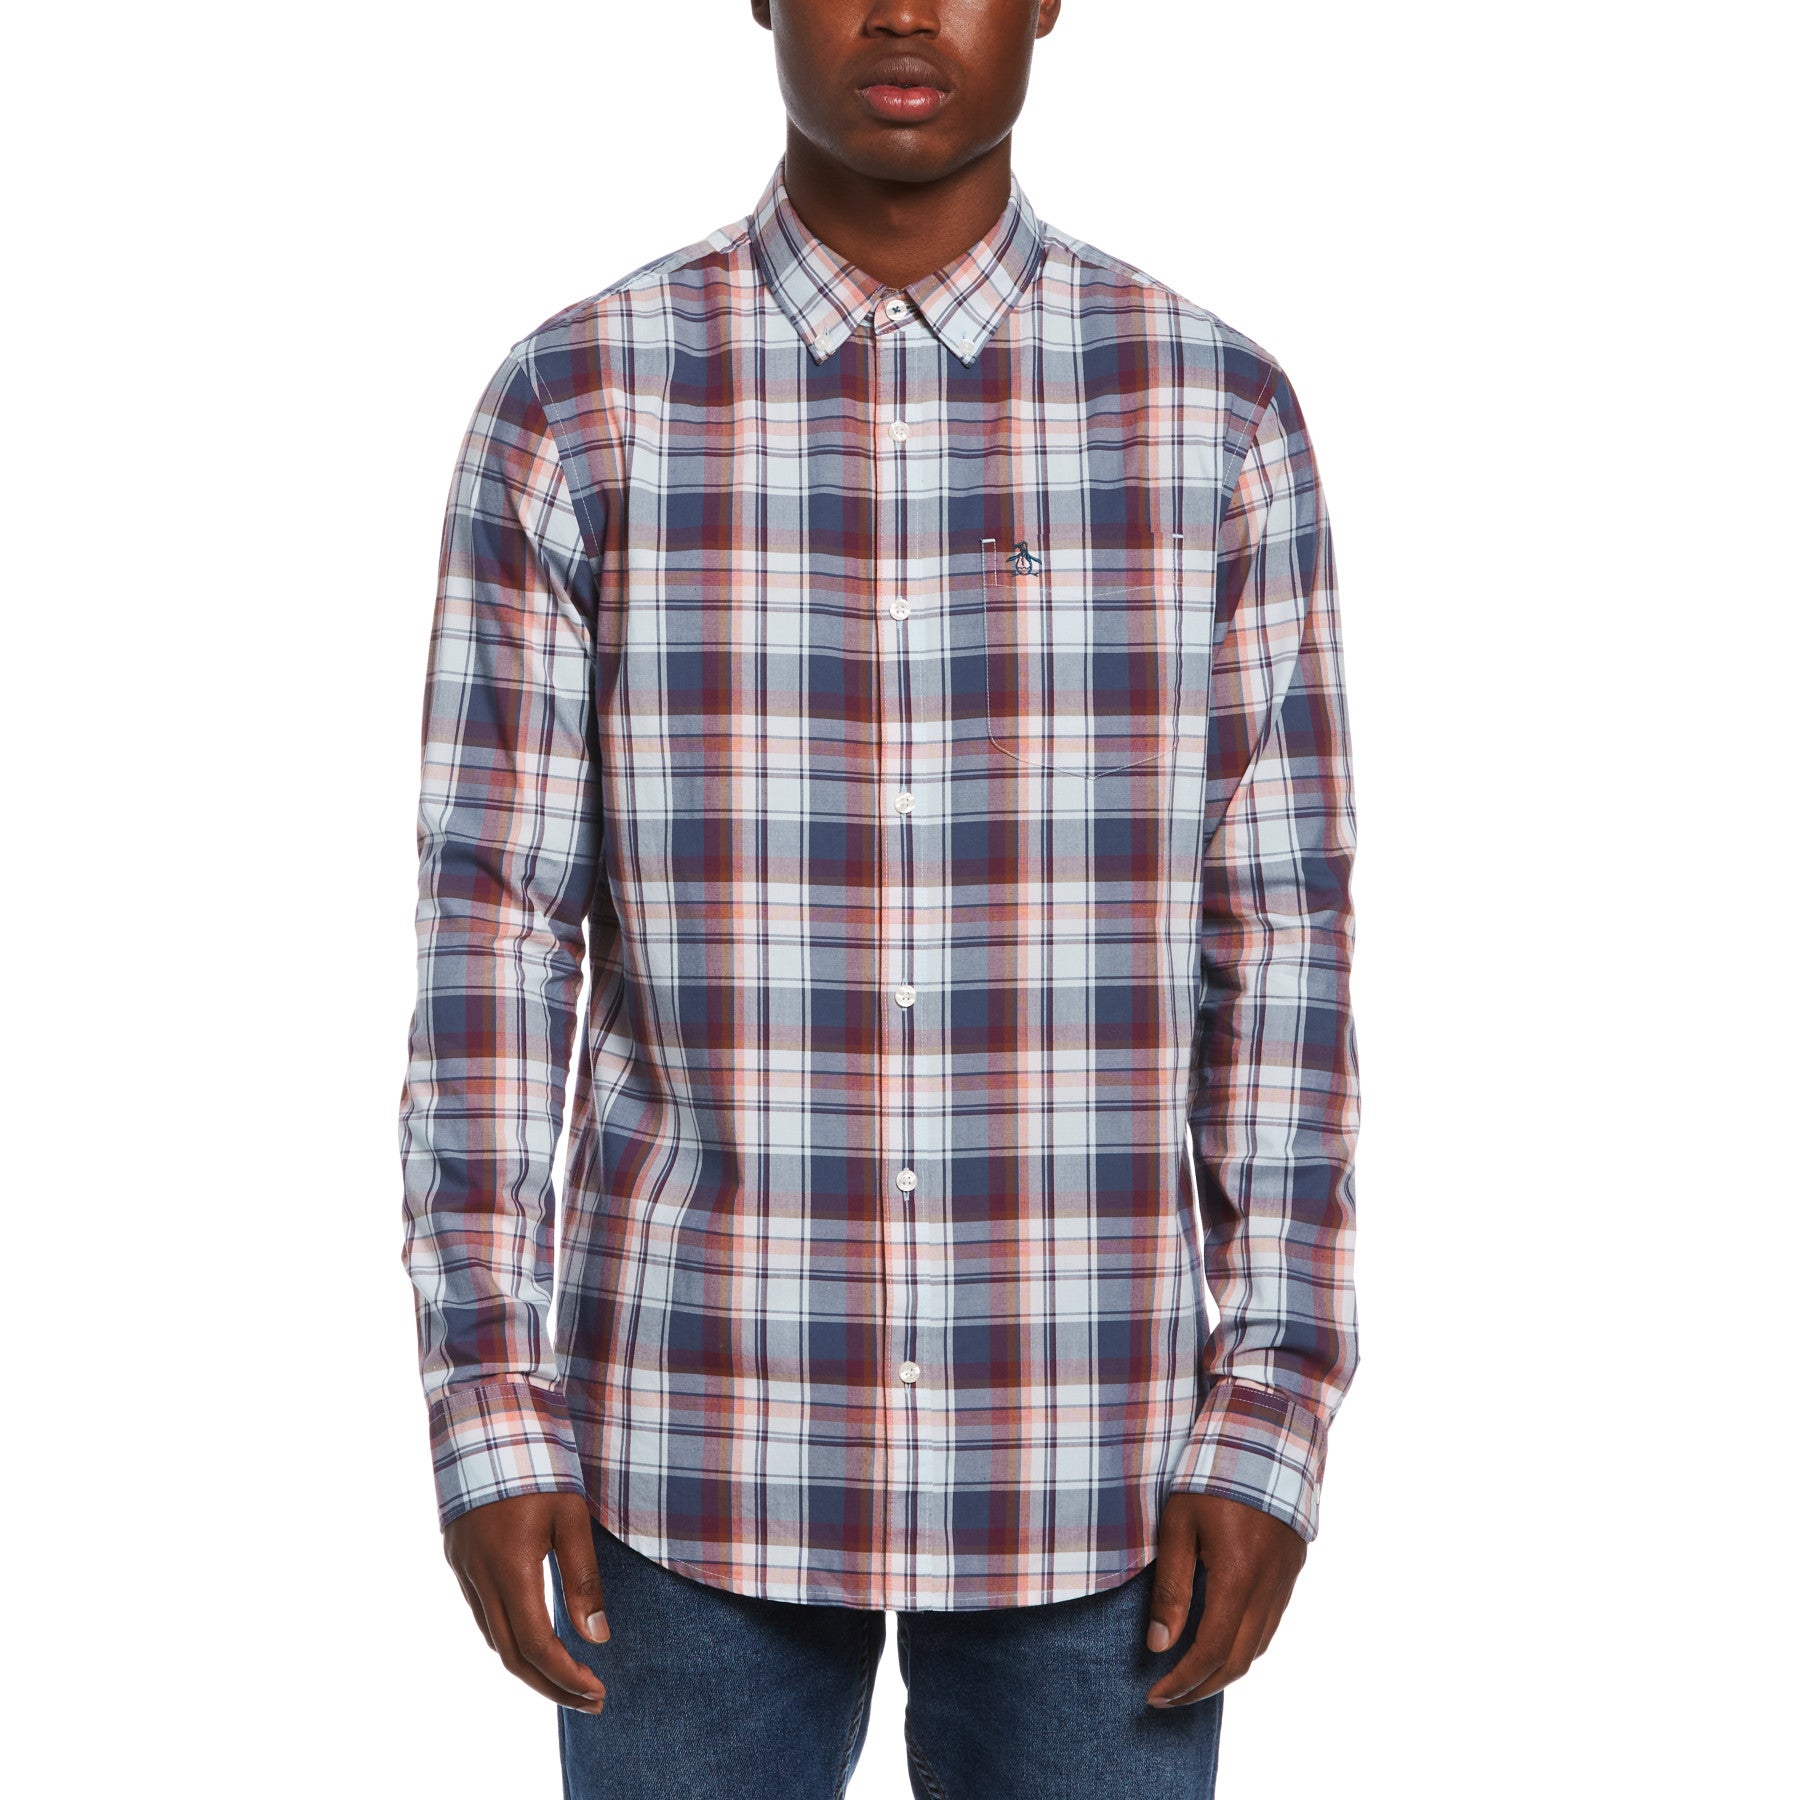 View Jaspe Plaid Shirt In Blue Coral information